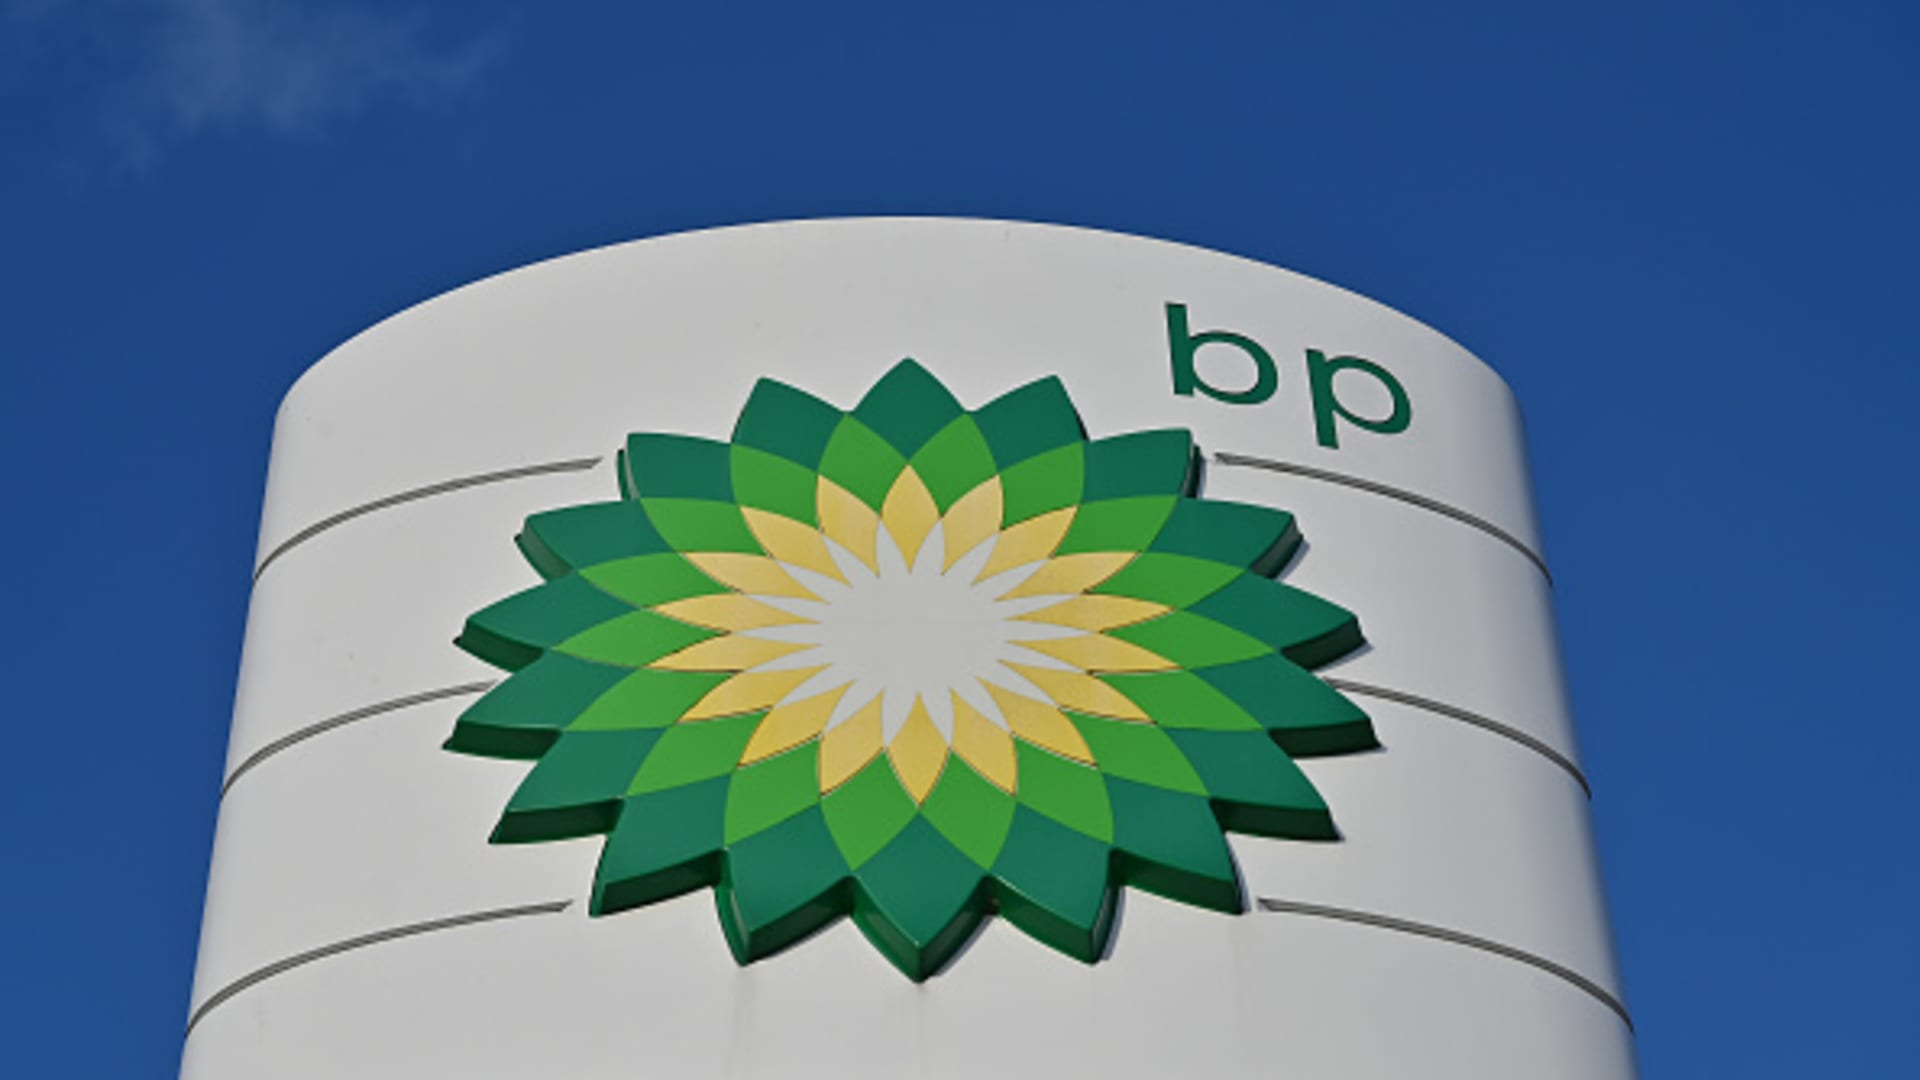 One activist investor is taking on BP, urging the oil giant to scale back green pledges